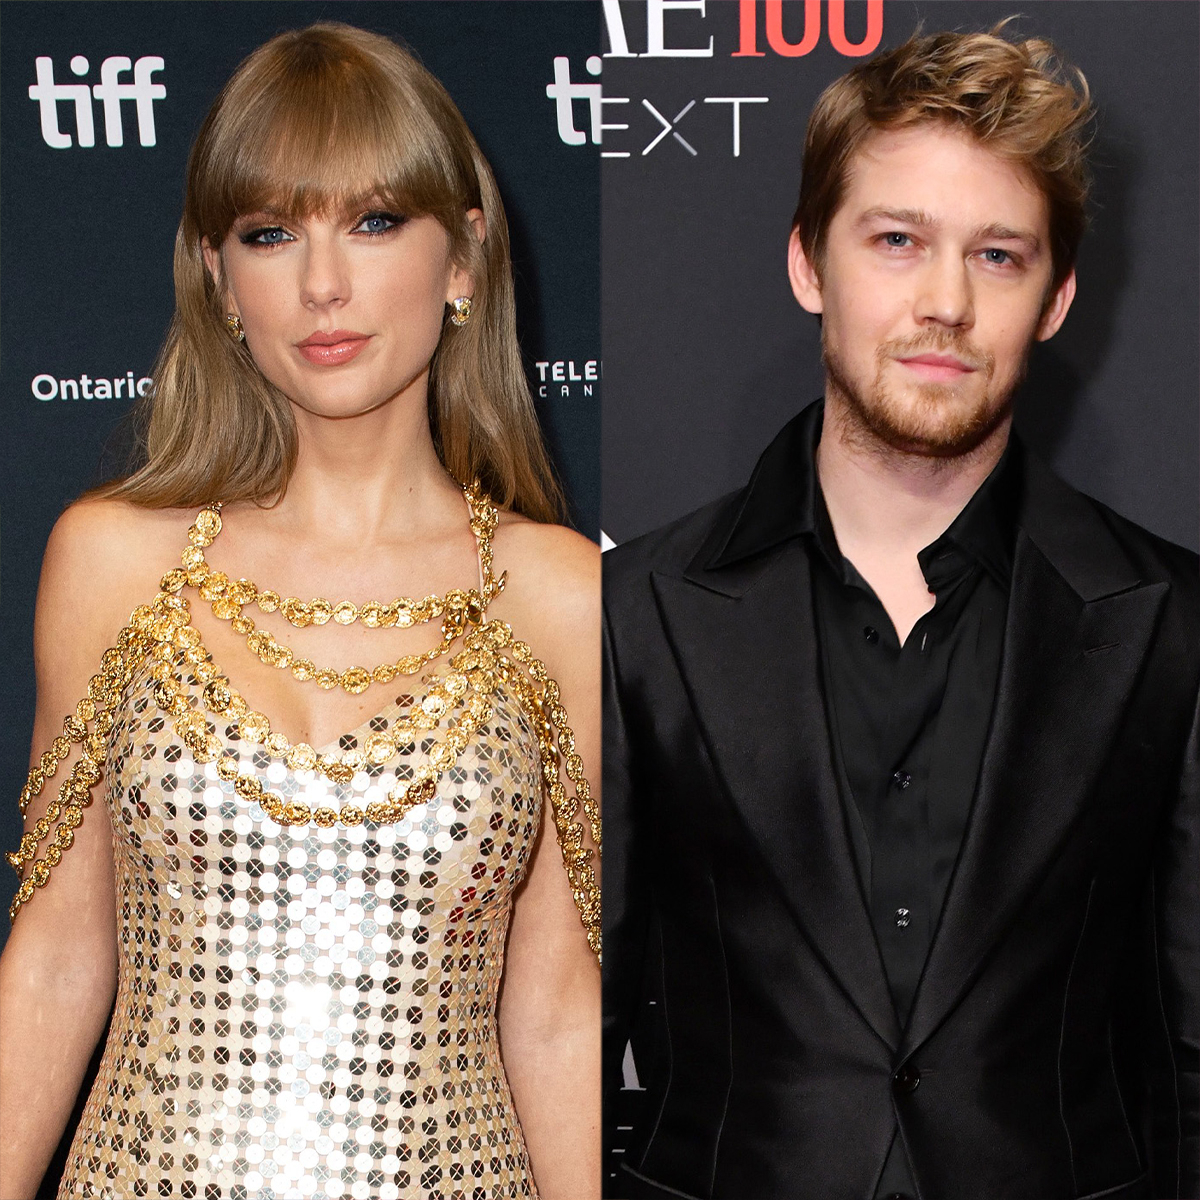 Why Swifties Think Taylor Swift and Ex Joe Alwyn’s Relationship Issues Trace Back to 2021